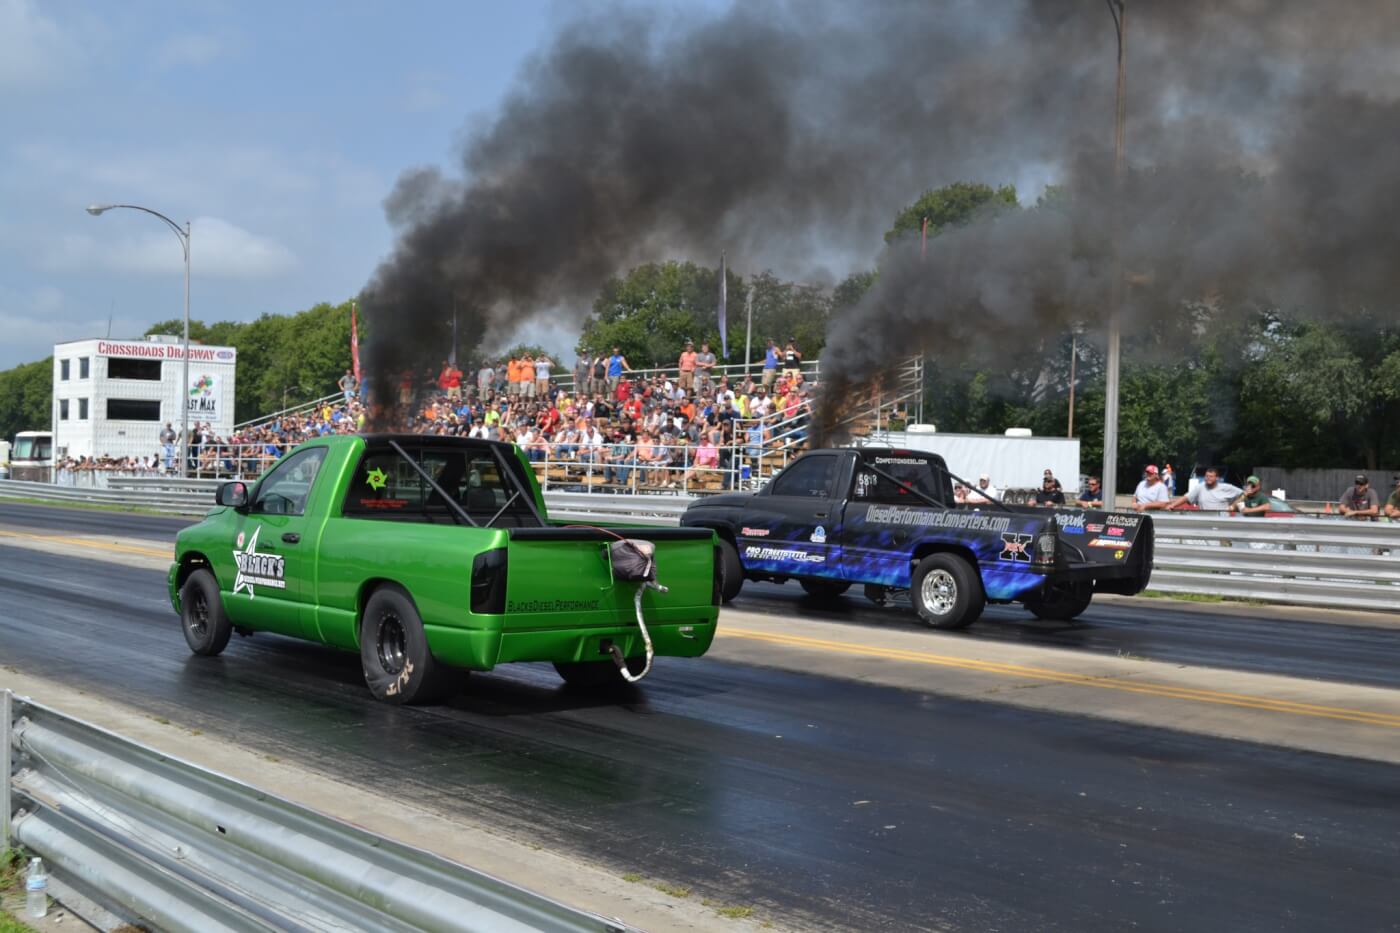 Here’s an example of the popular 2wd versus 4wd battle that occurs on drag strips across the country. As you can see by the race here, competition is almost always close!